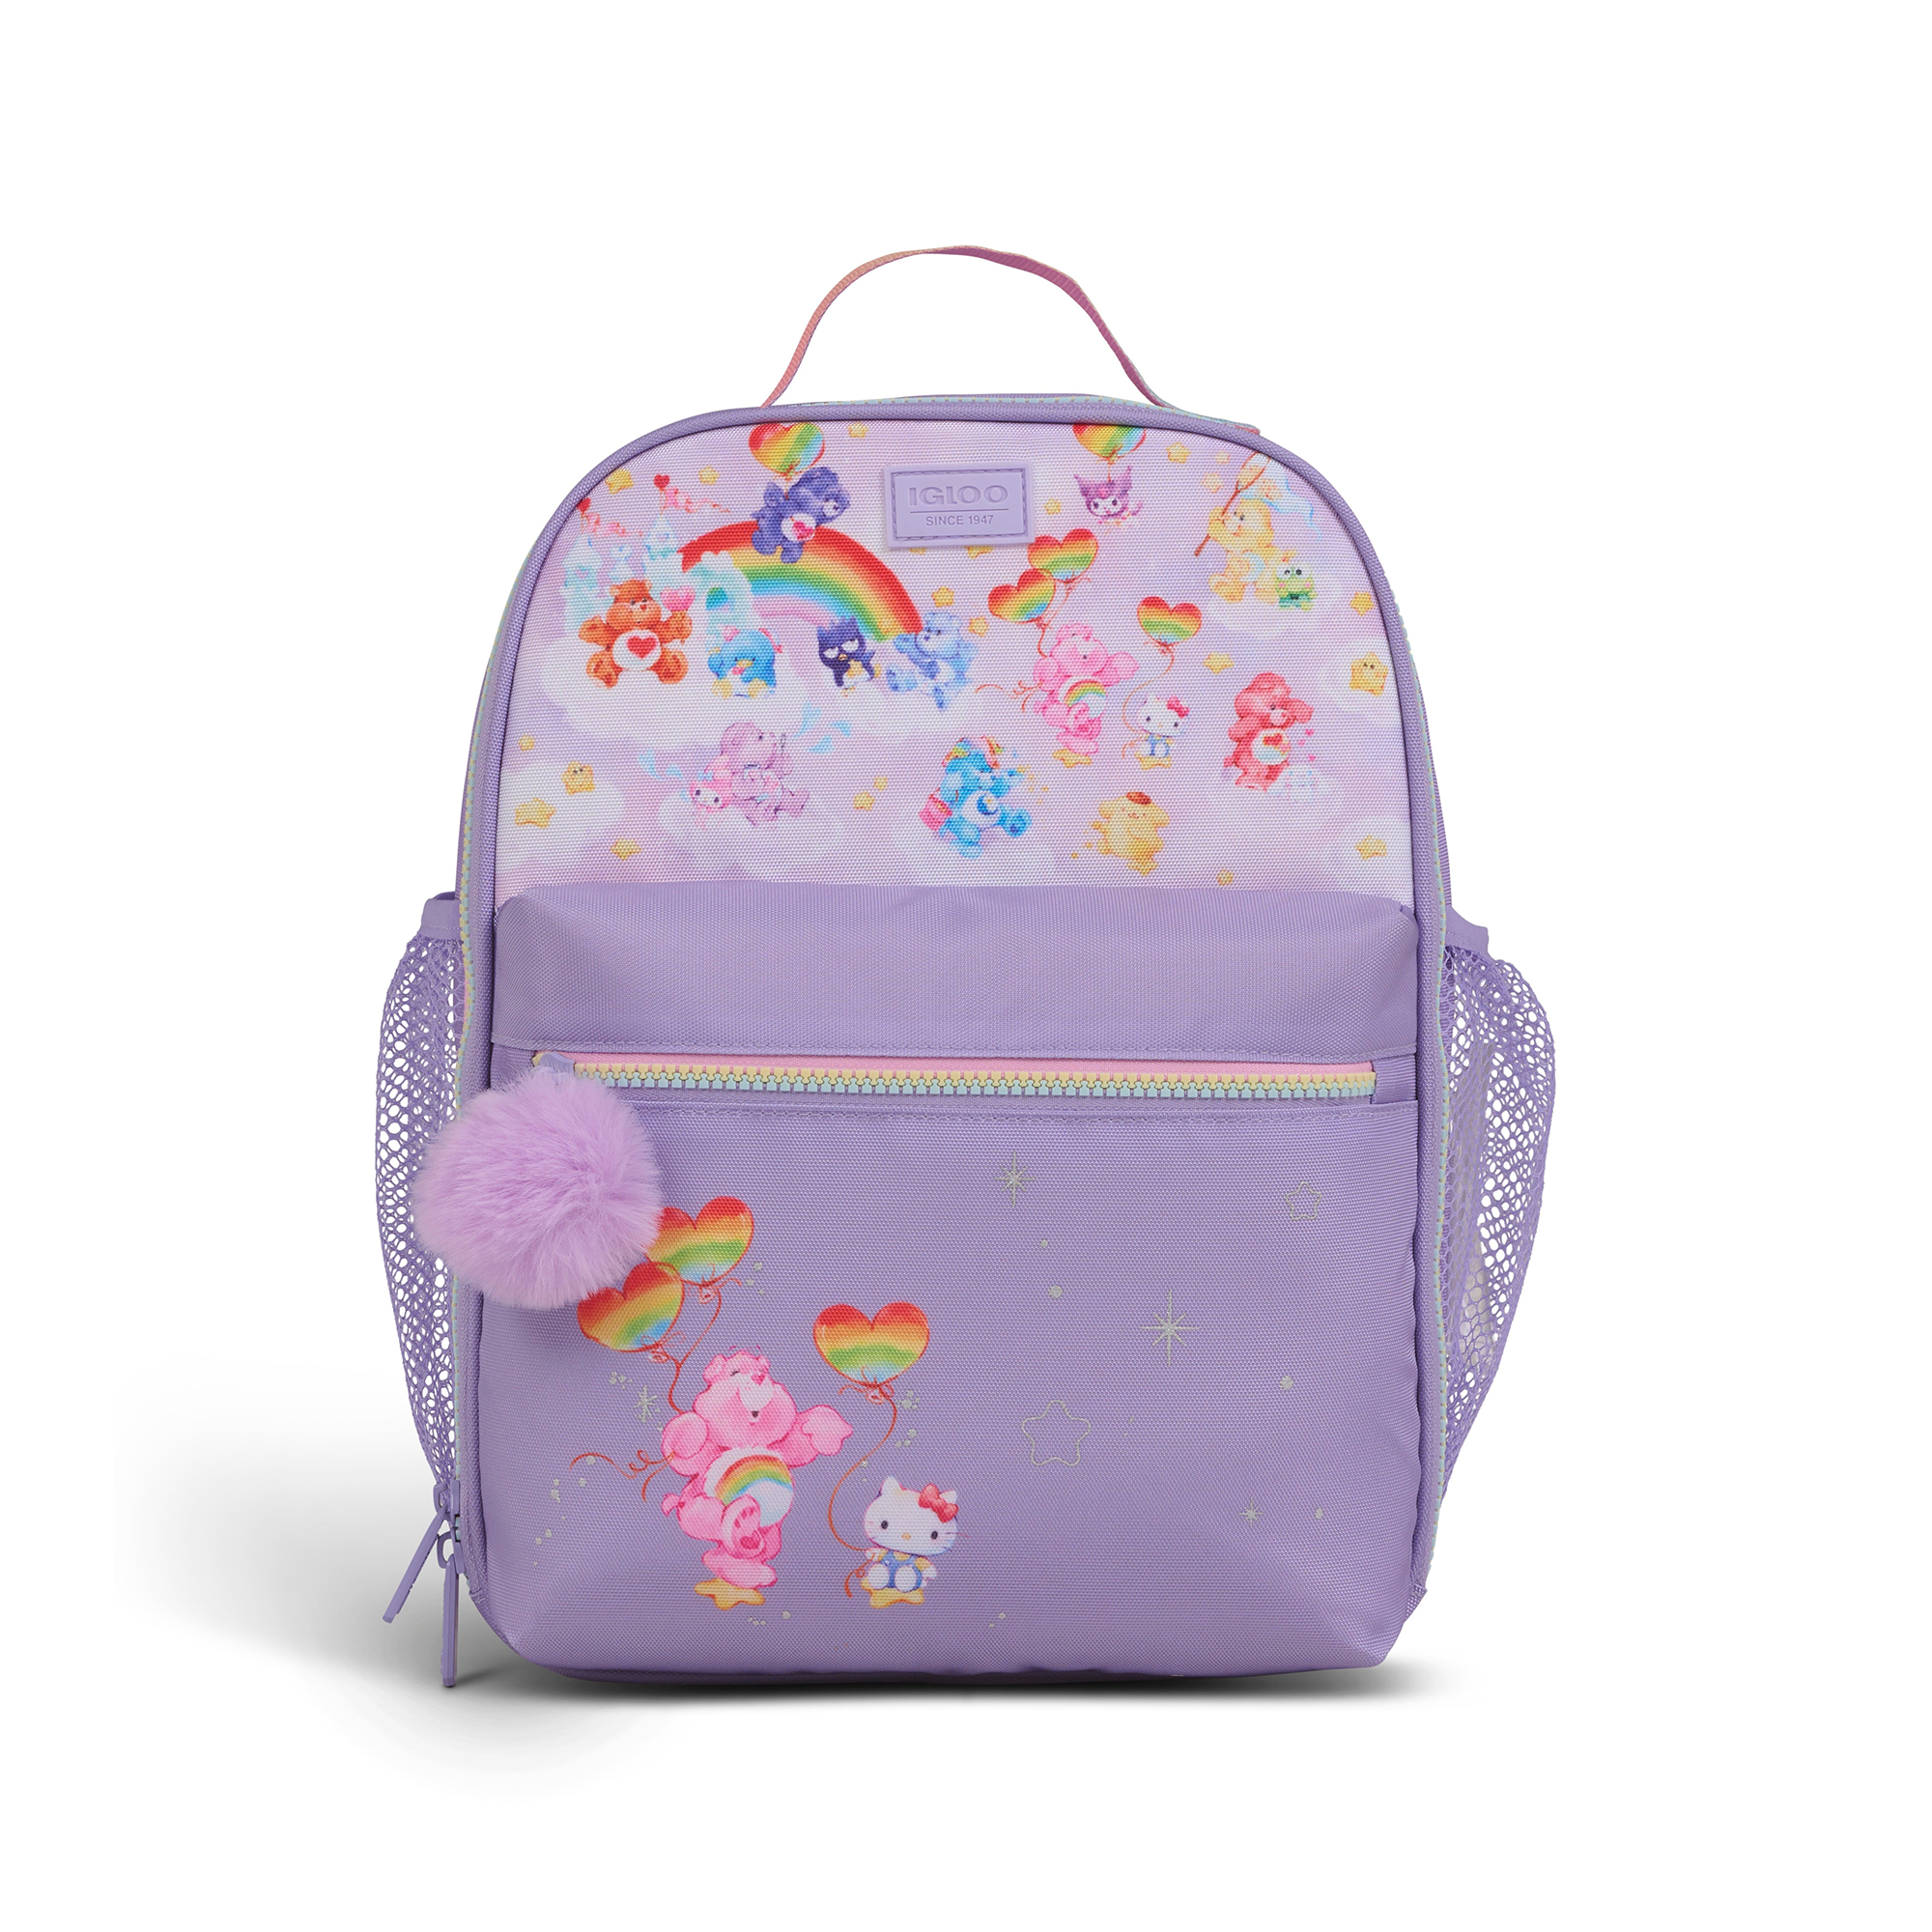 Hello Kitty and Friends x Care Bears Igloo Mini Backpack Cooler Travel Igloo Products Corp   